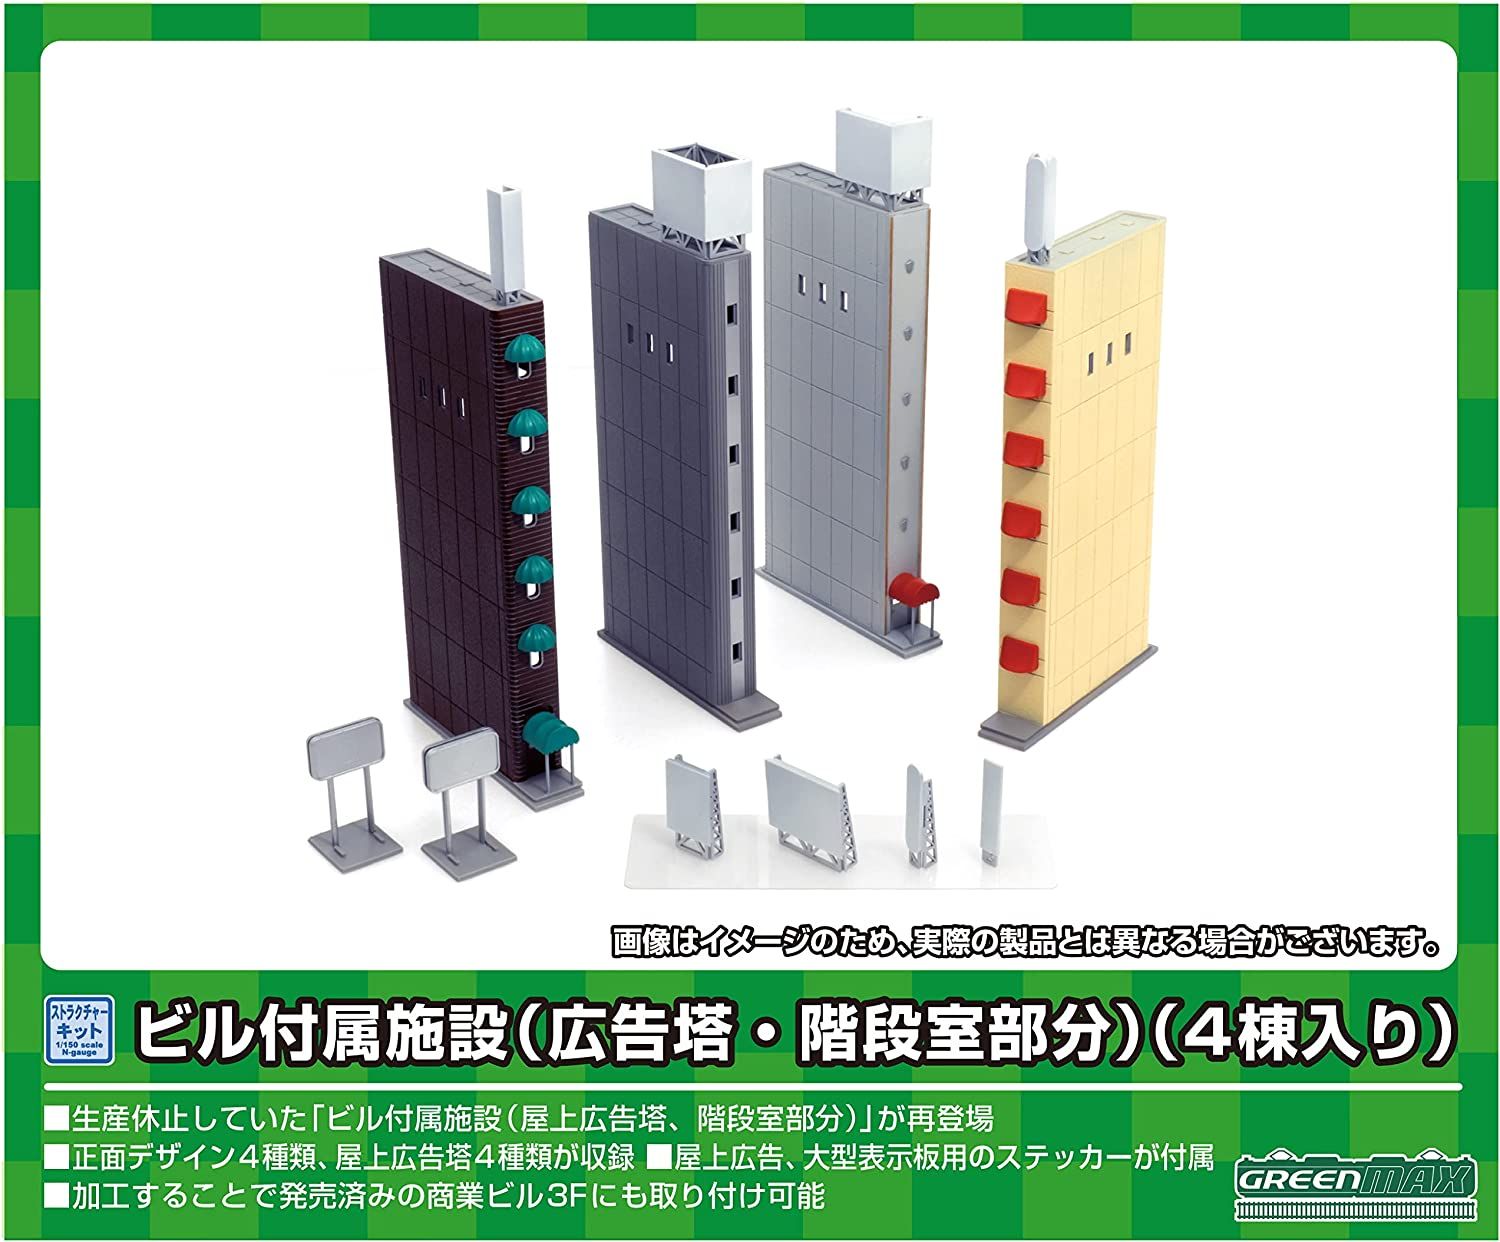 Greenmax 2222 Facility Attached for Building (Advertising Tower & Stair H - BanzaiHobby